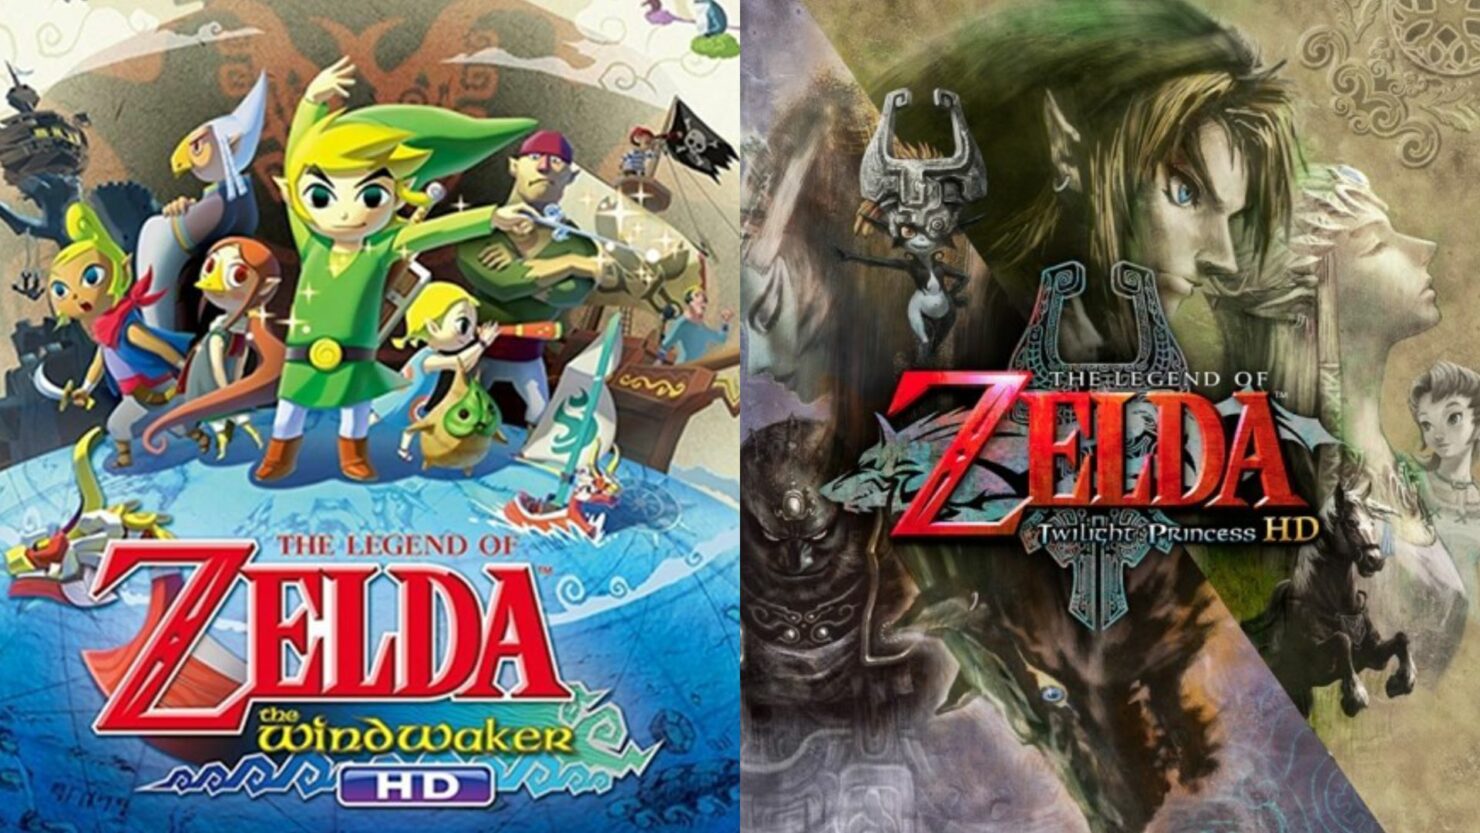 Remasters Of Twilight Princess And Wind Waker Will Be Released This Year